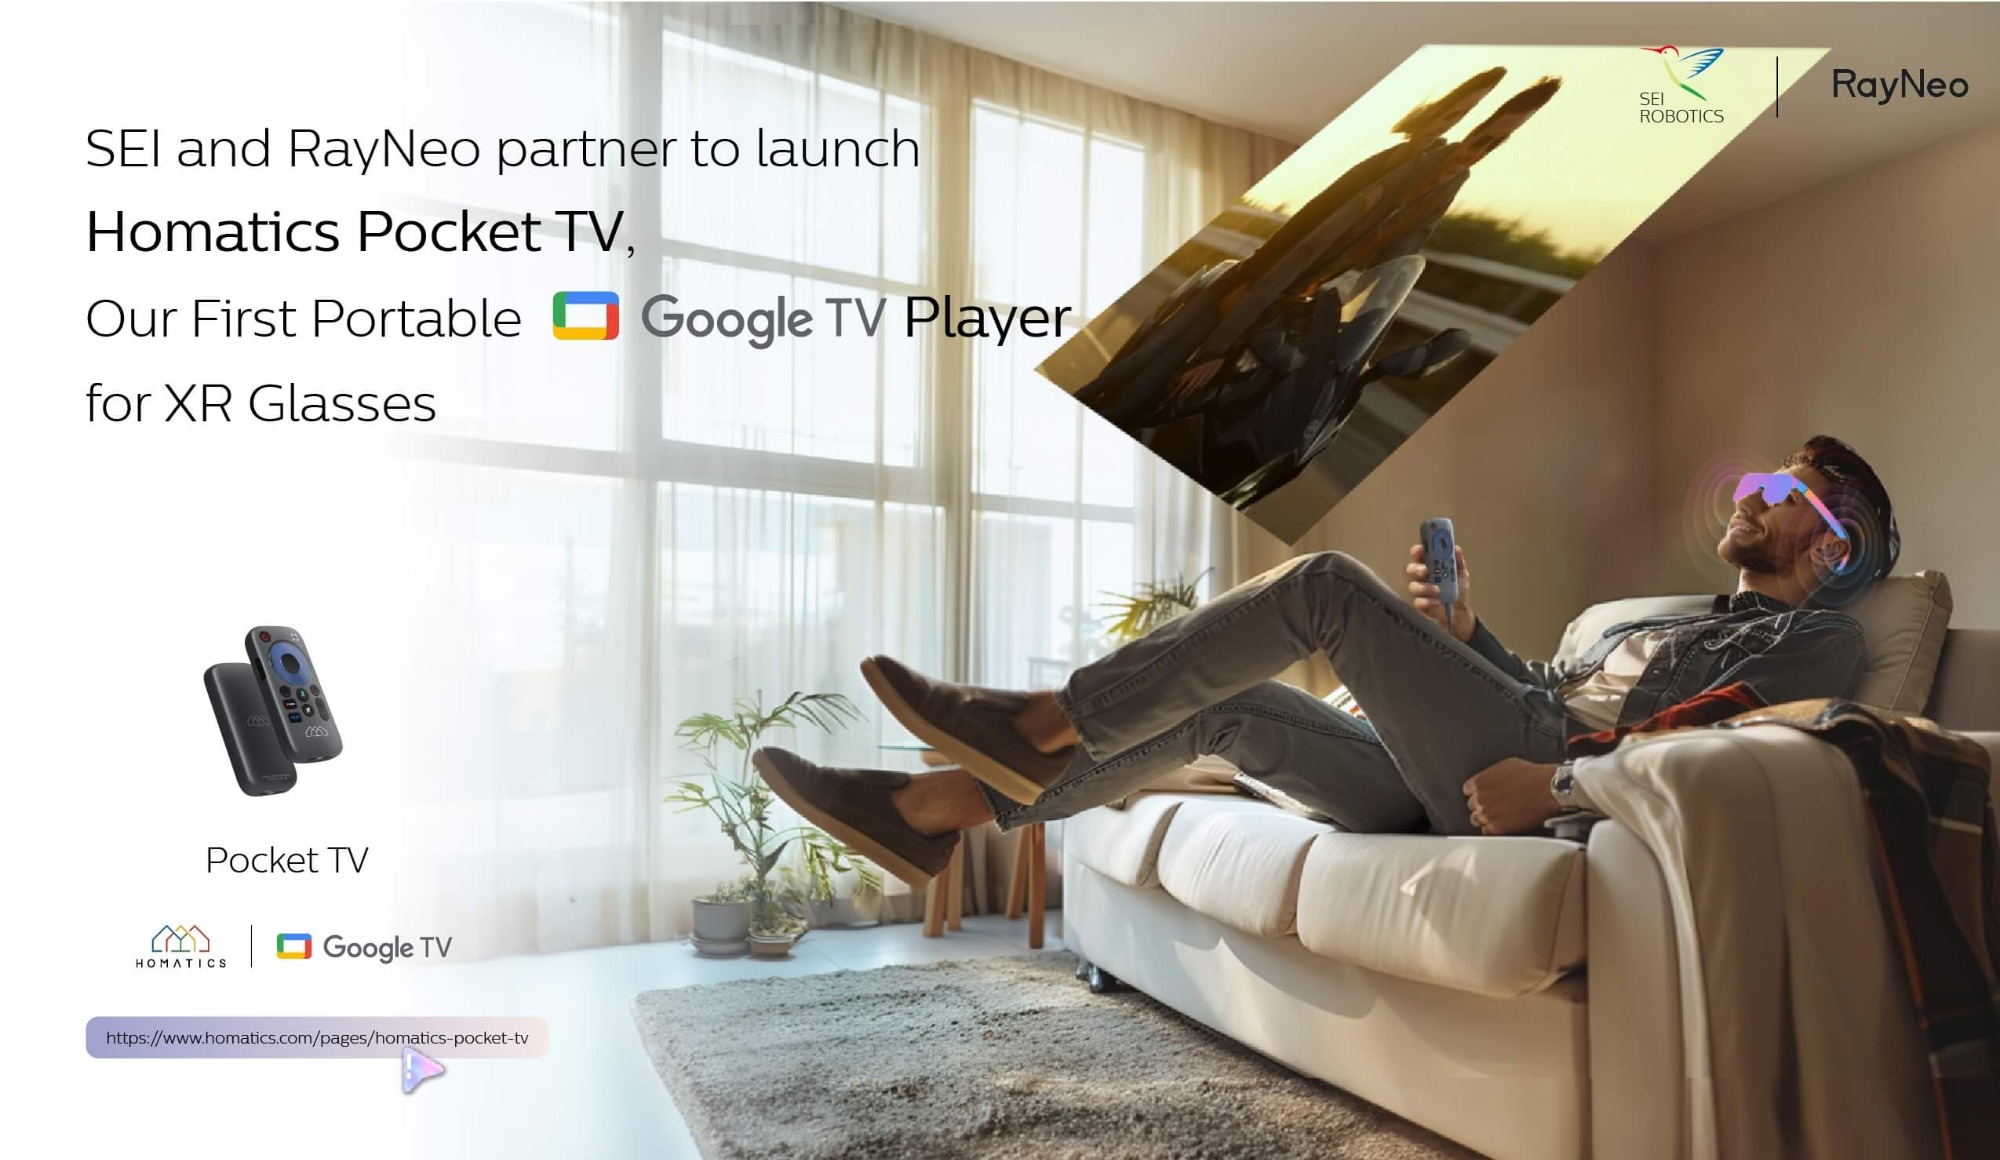 SEI and RayNeo partner to launch Homatics Pocket TV, Our First Portable Google TV™ Player for XR Glasses